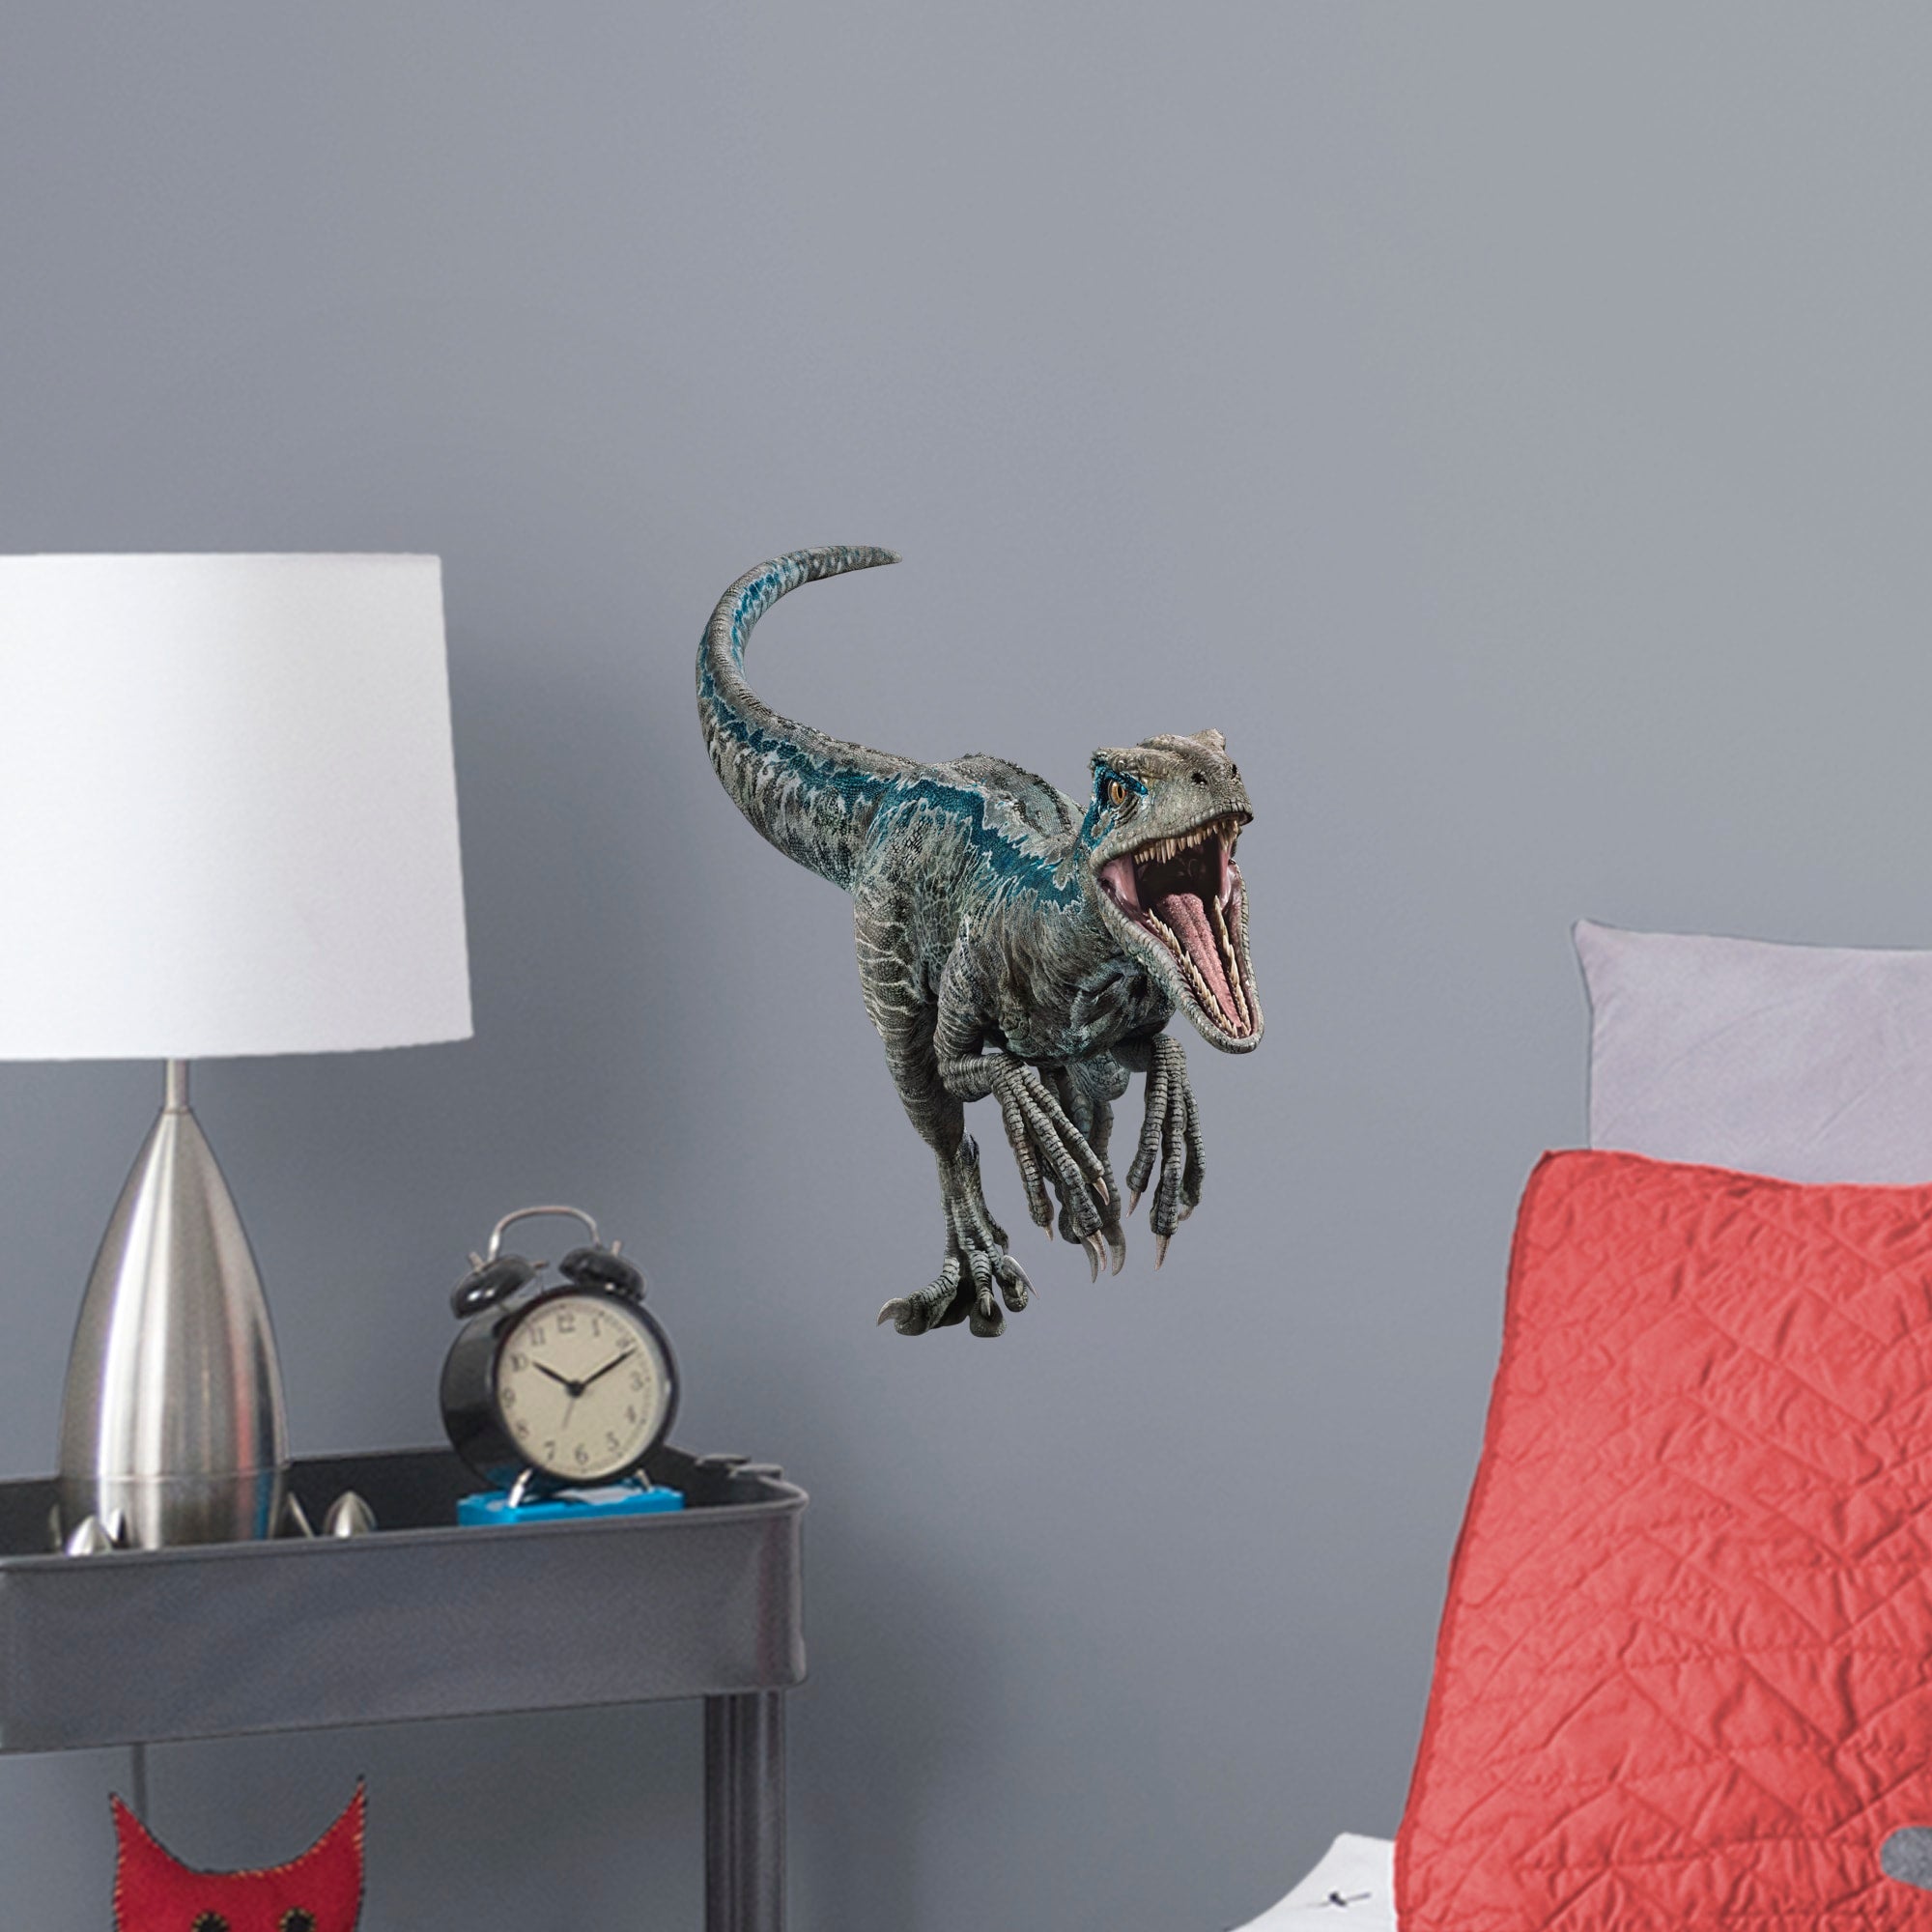 Velociraptor "Blue" - Jurassic World: Fallen Kingdom - Officially Licensed Removable Wall Decal Large by Fathead | Vinyl